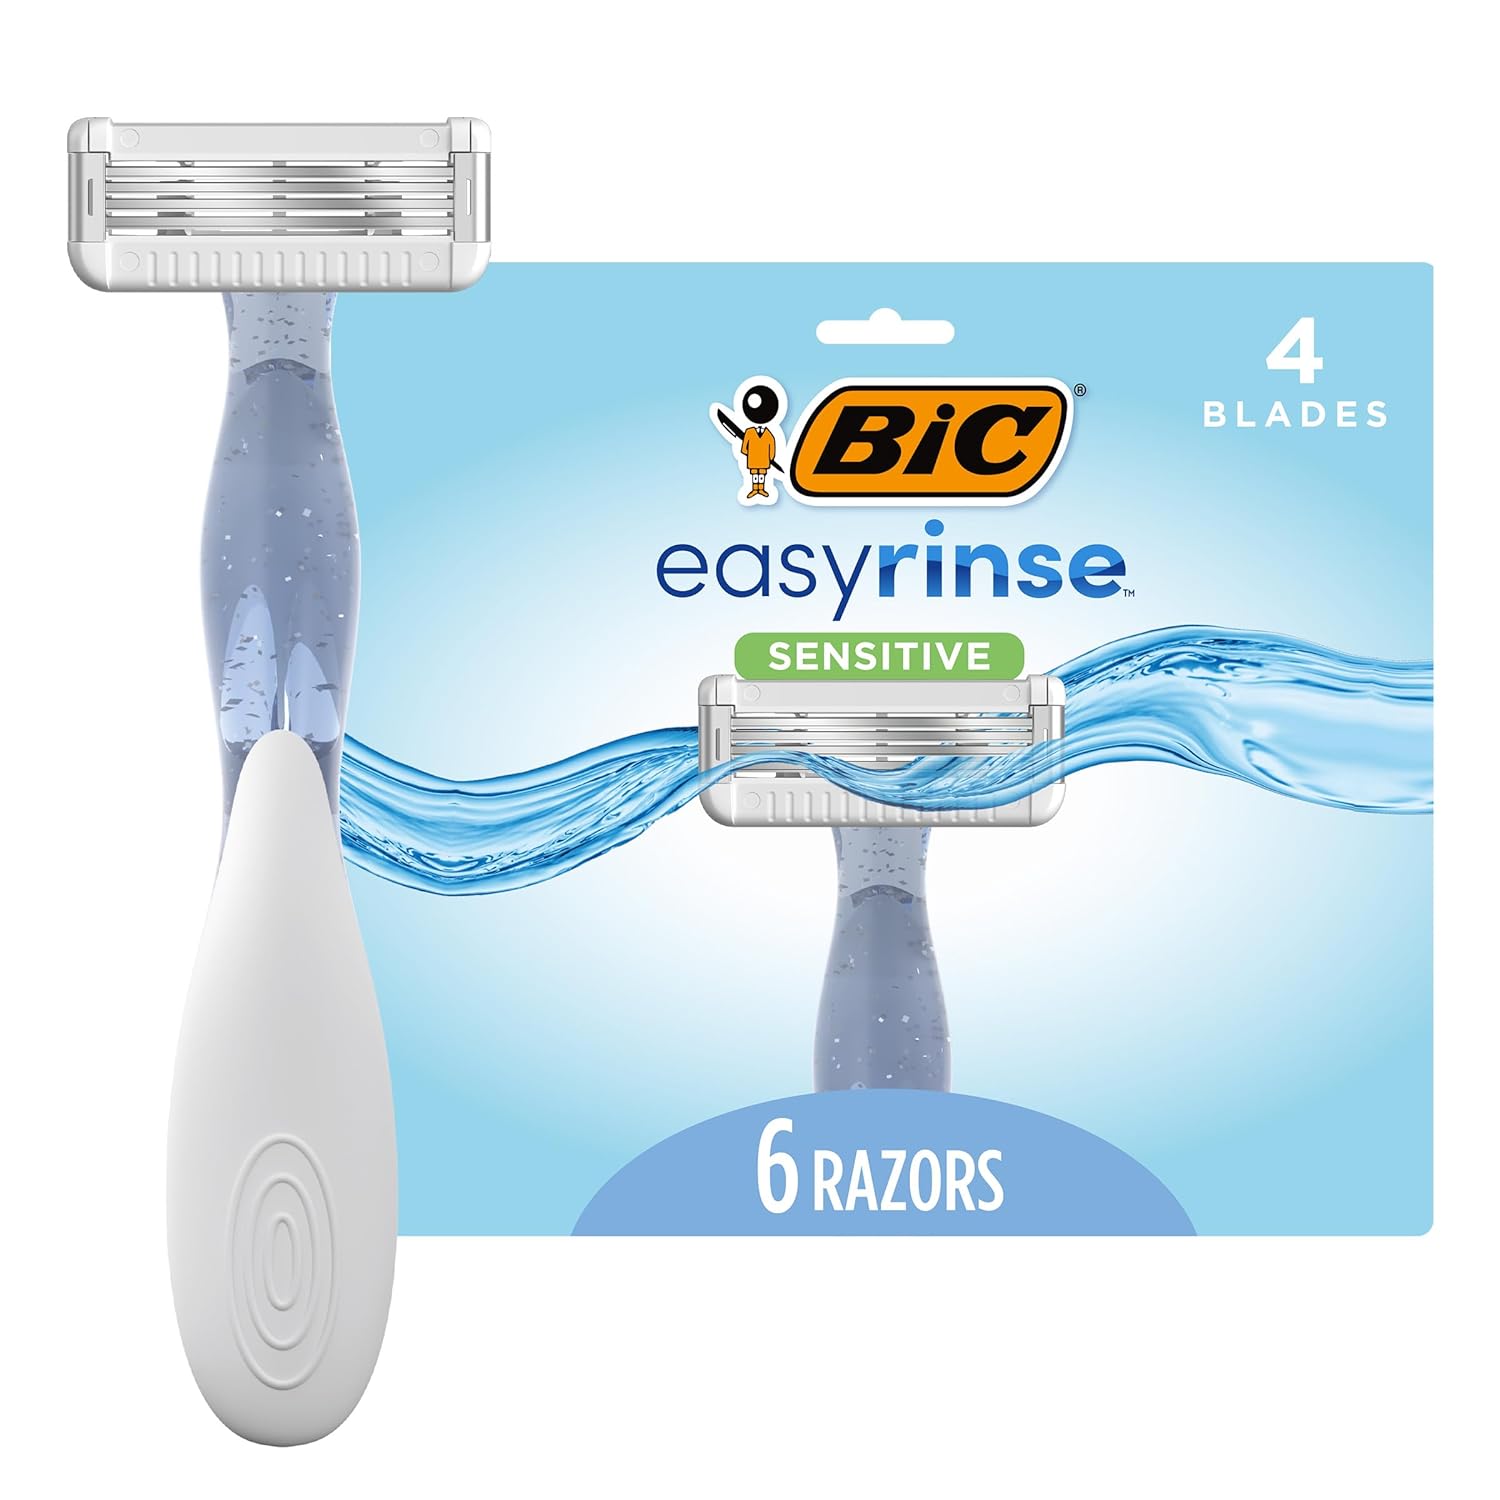 BIC EasyRinse Sensitive Anti-Clogging Women' Disposable Razors, Clinically Proven for Sensitive Skin, Shaving Razors With 4 Blades, 6 Count